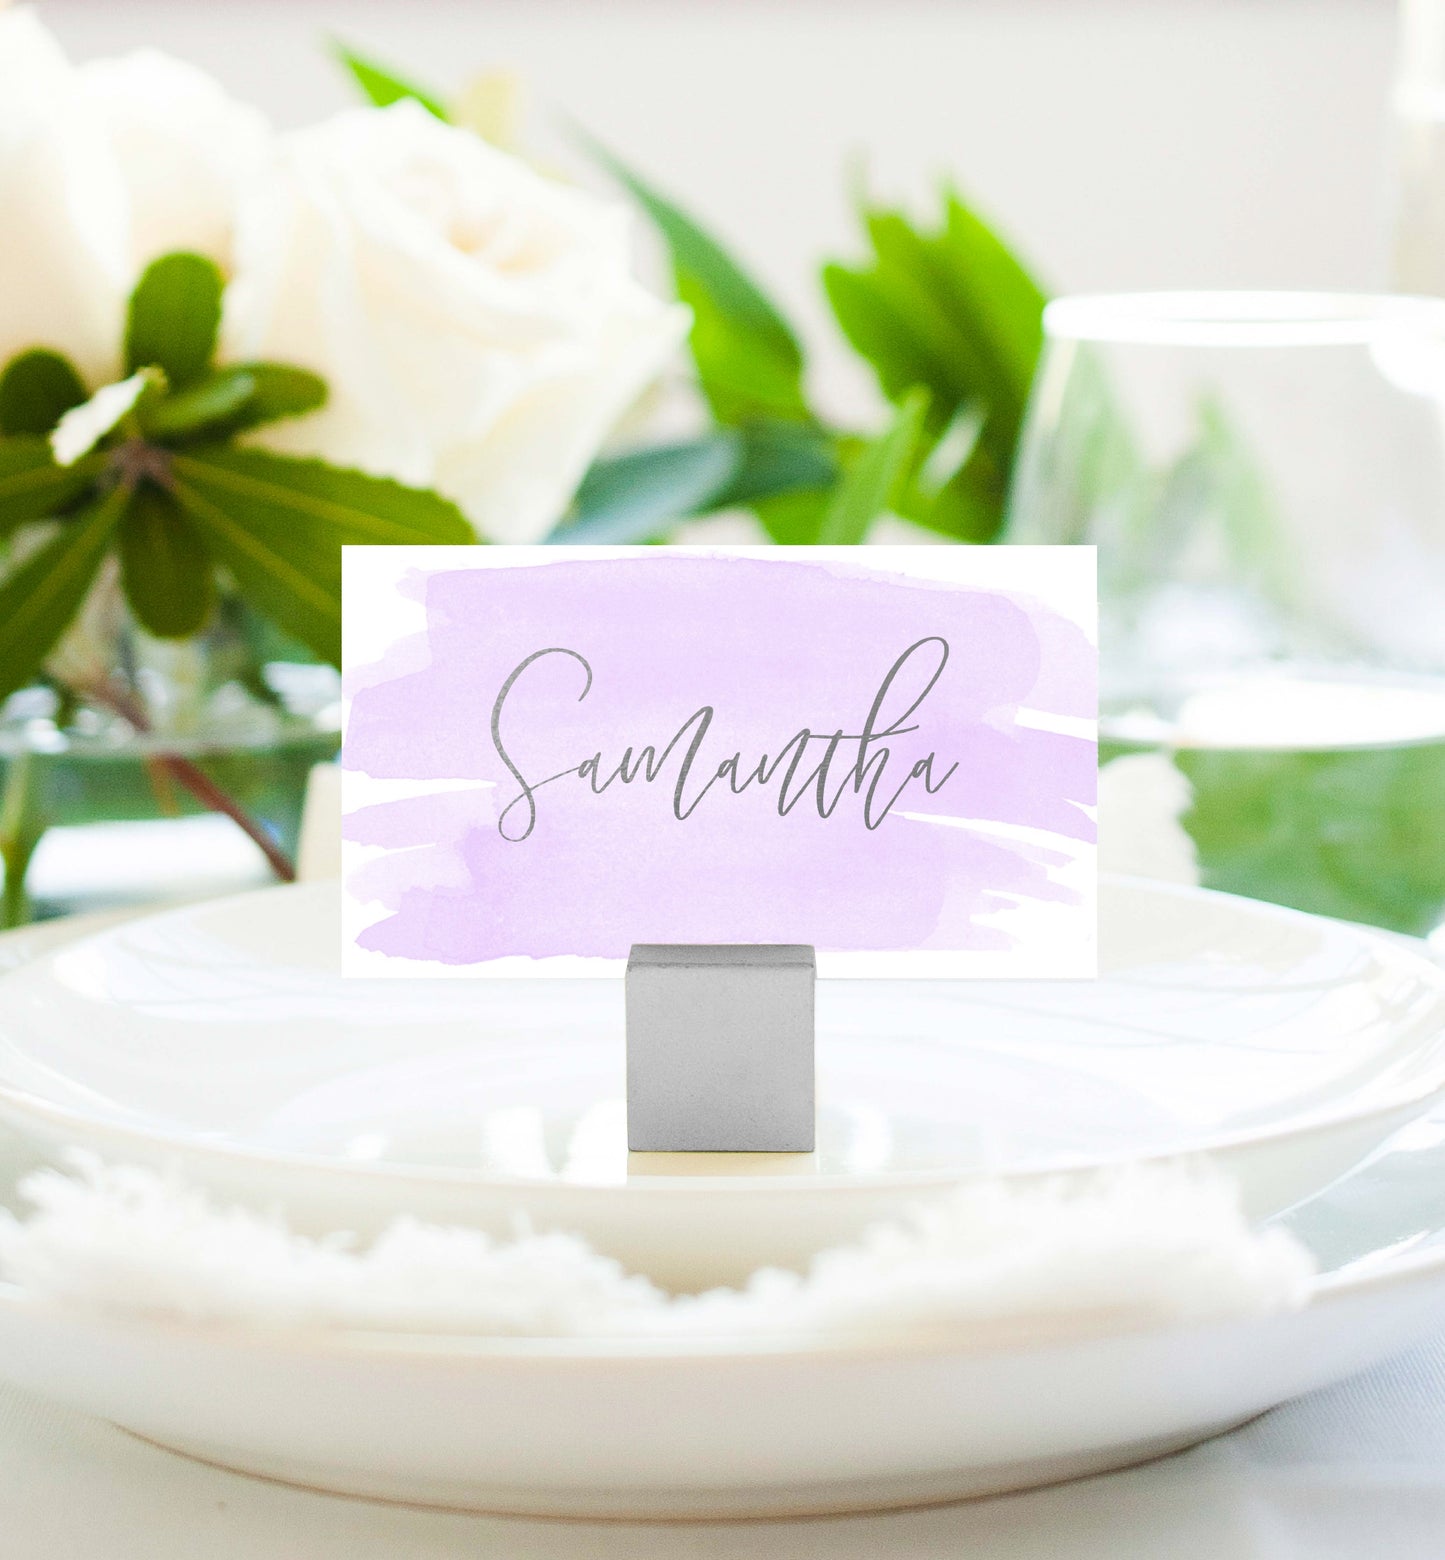 Watercolour Purple Silver | Printable Place Cards Template